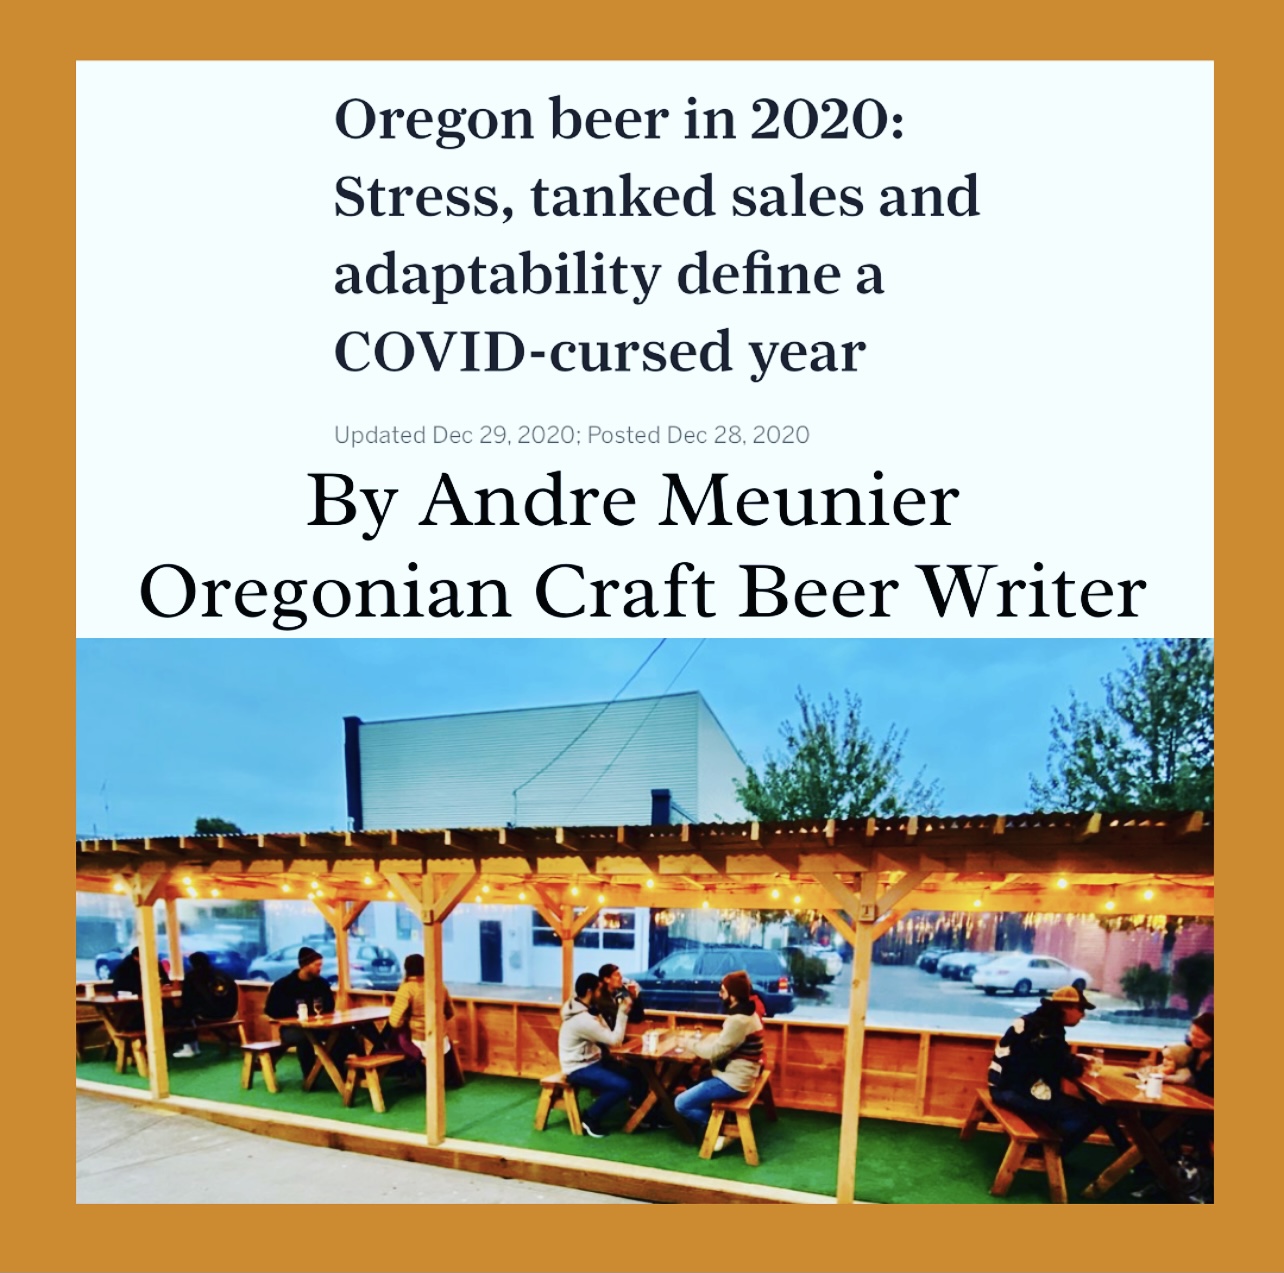 Andre Meunier March 2020 to March 2021 A Pandemic Year Review in Portland, Oregon Craft Beer – Craft Beer Podcast Episode 129 by Steven Shomler 